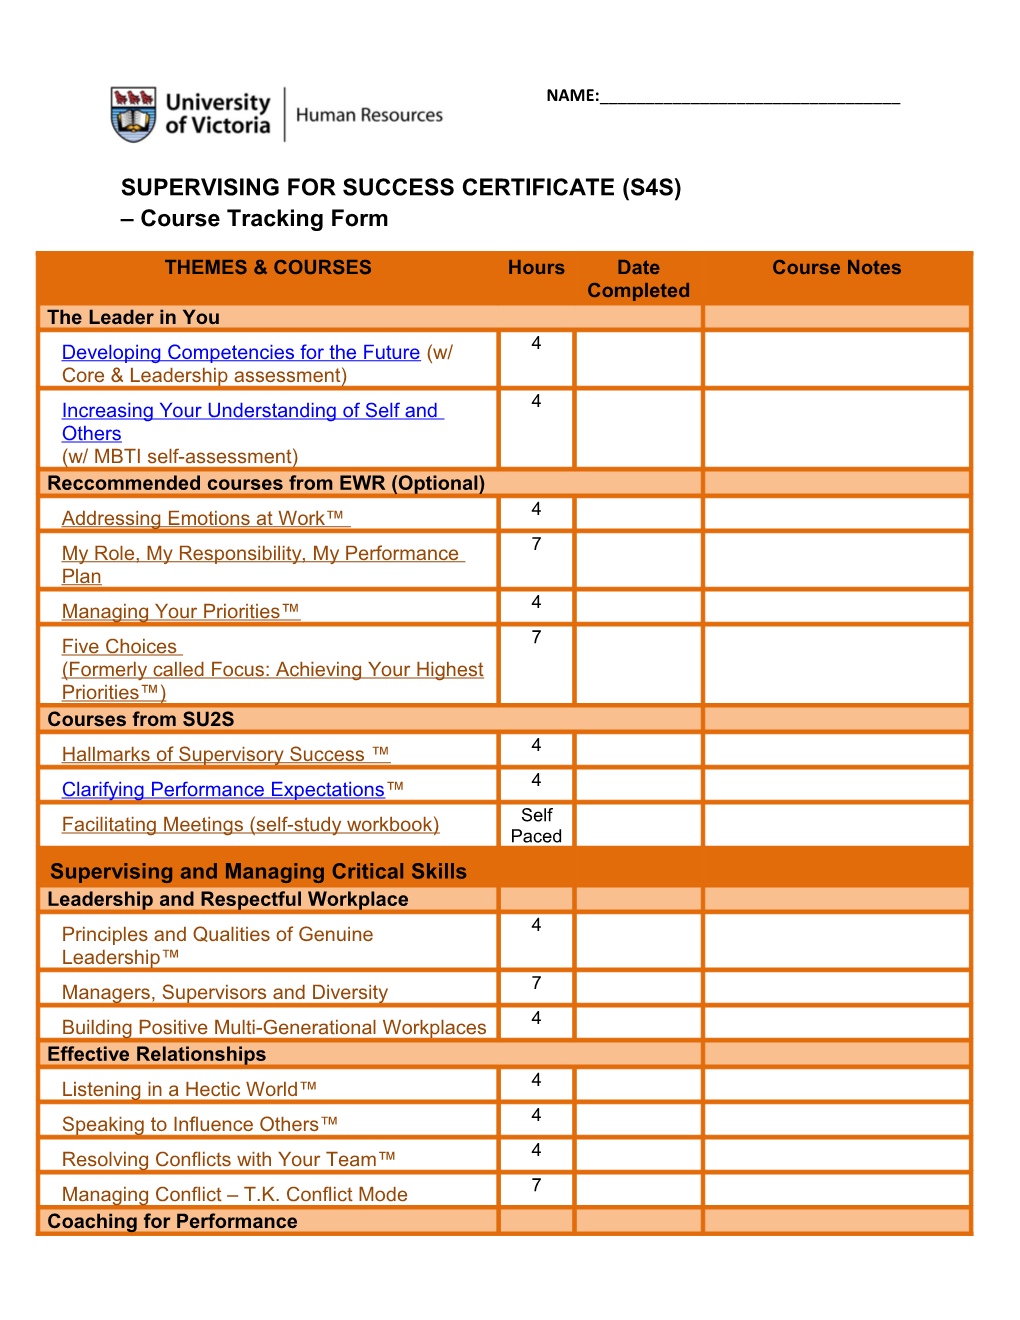 SUPERVISING for SUCCESS CERTIFICATE (S4S) Course Tracking Form